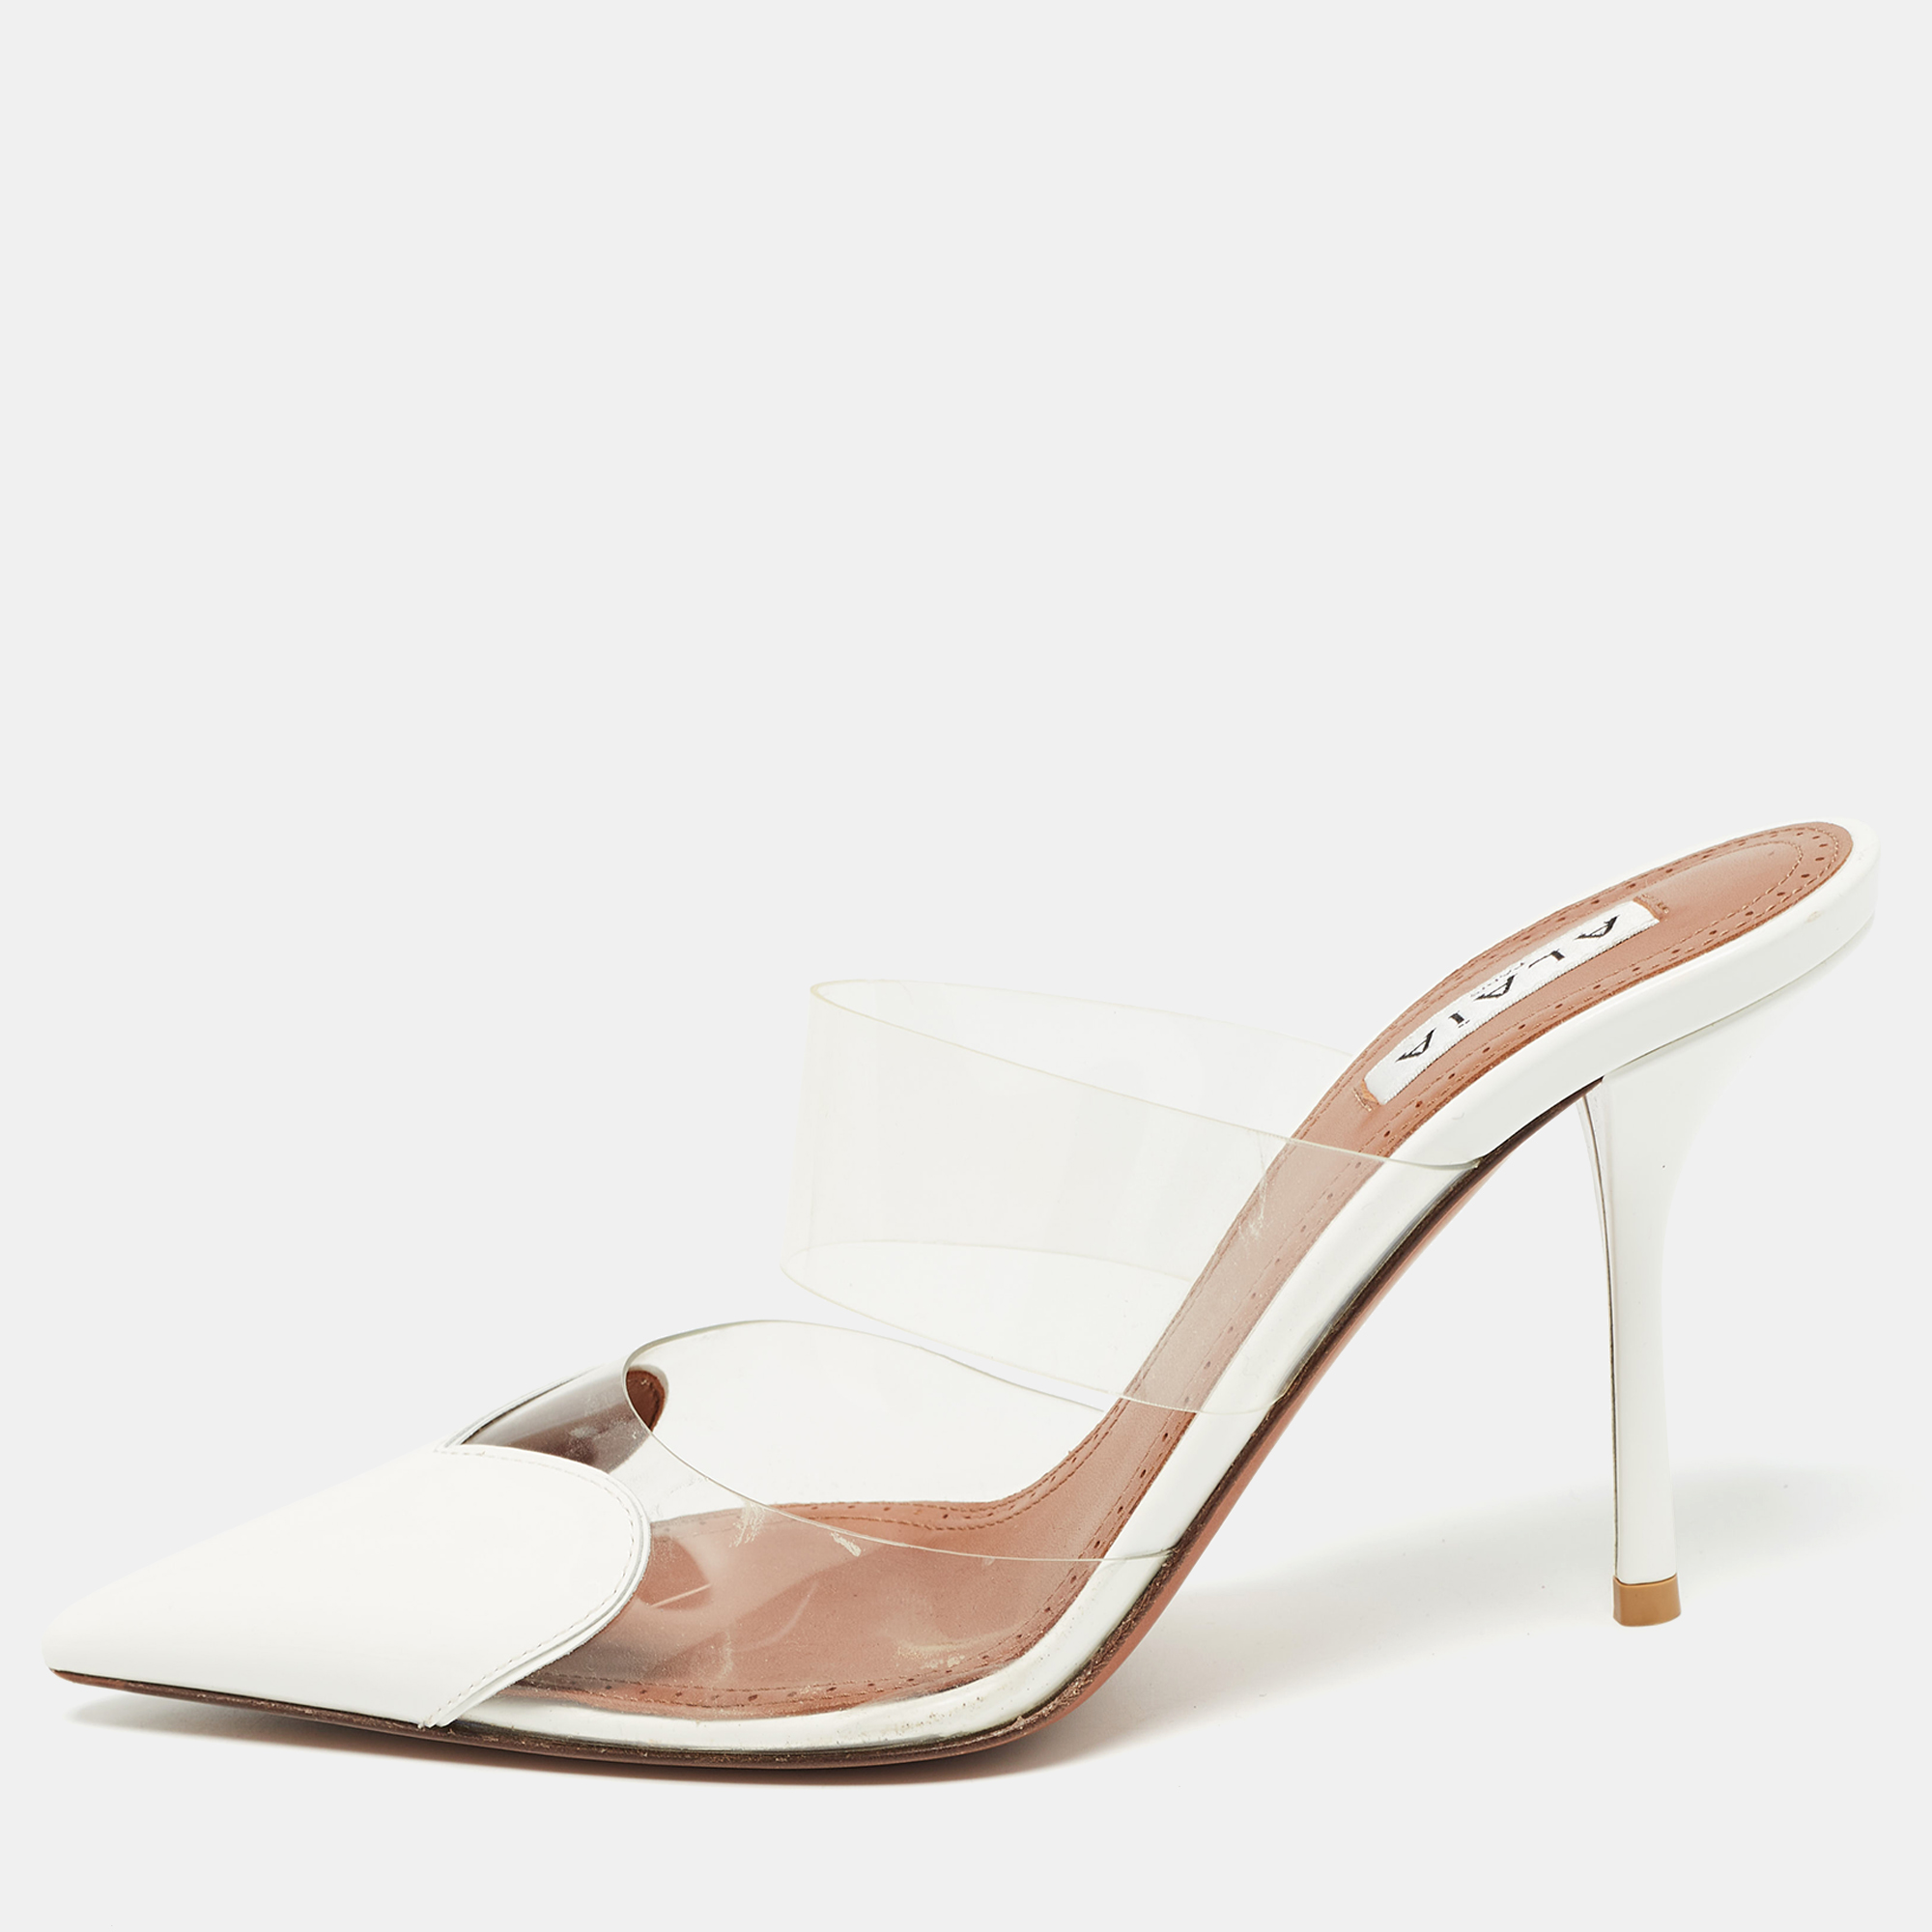 Alaia white/ transparent pvc and patent mules size 38